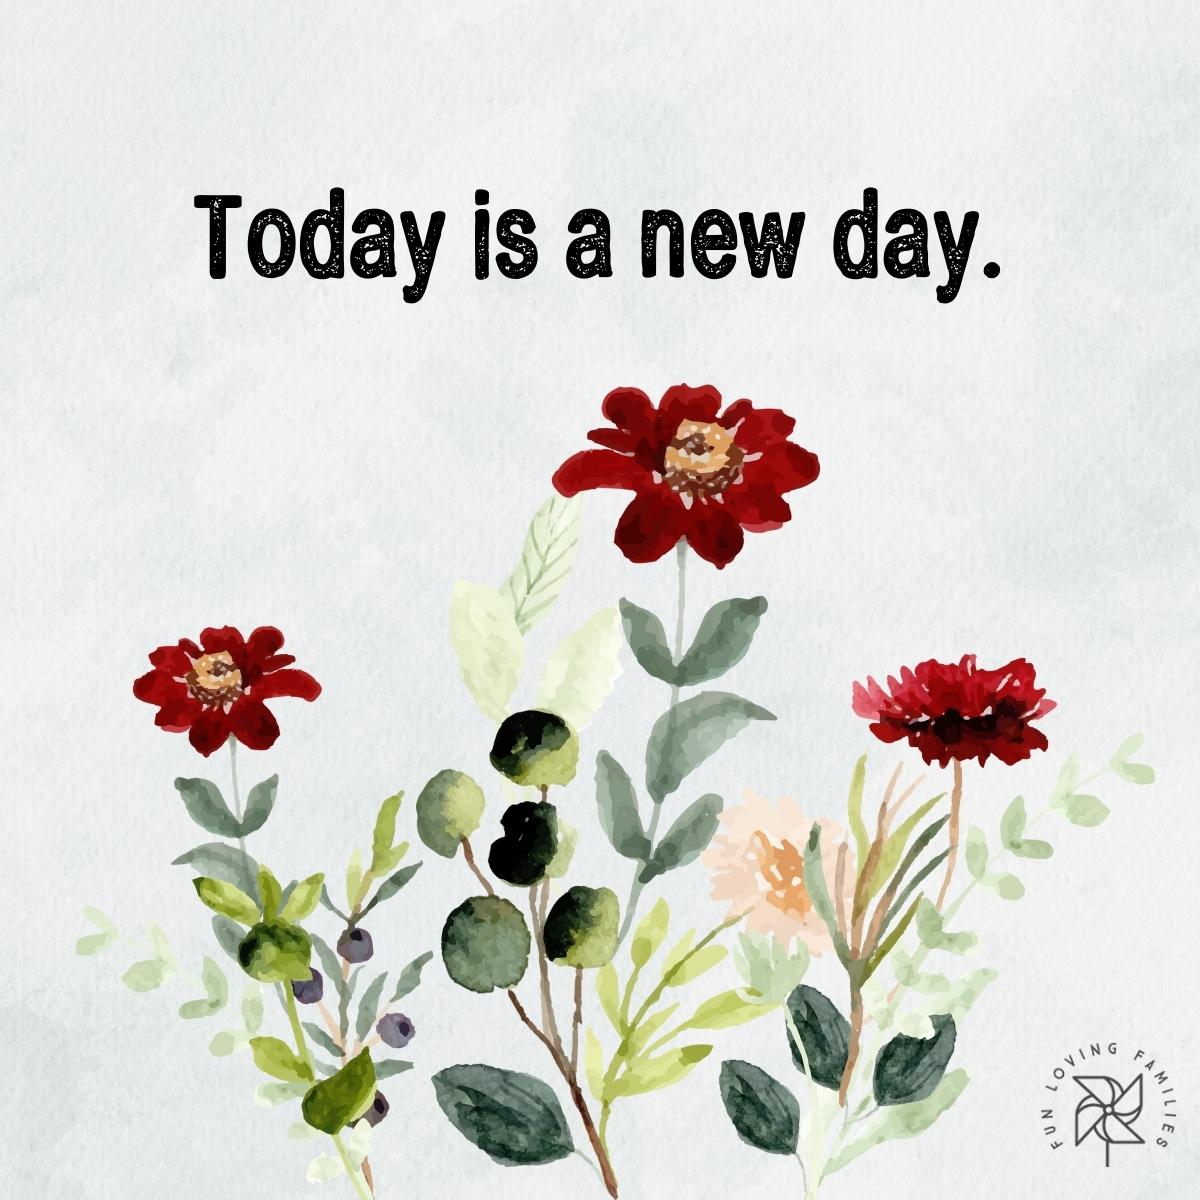 Today is a new day affirmation image